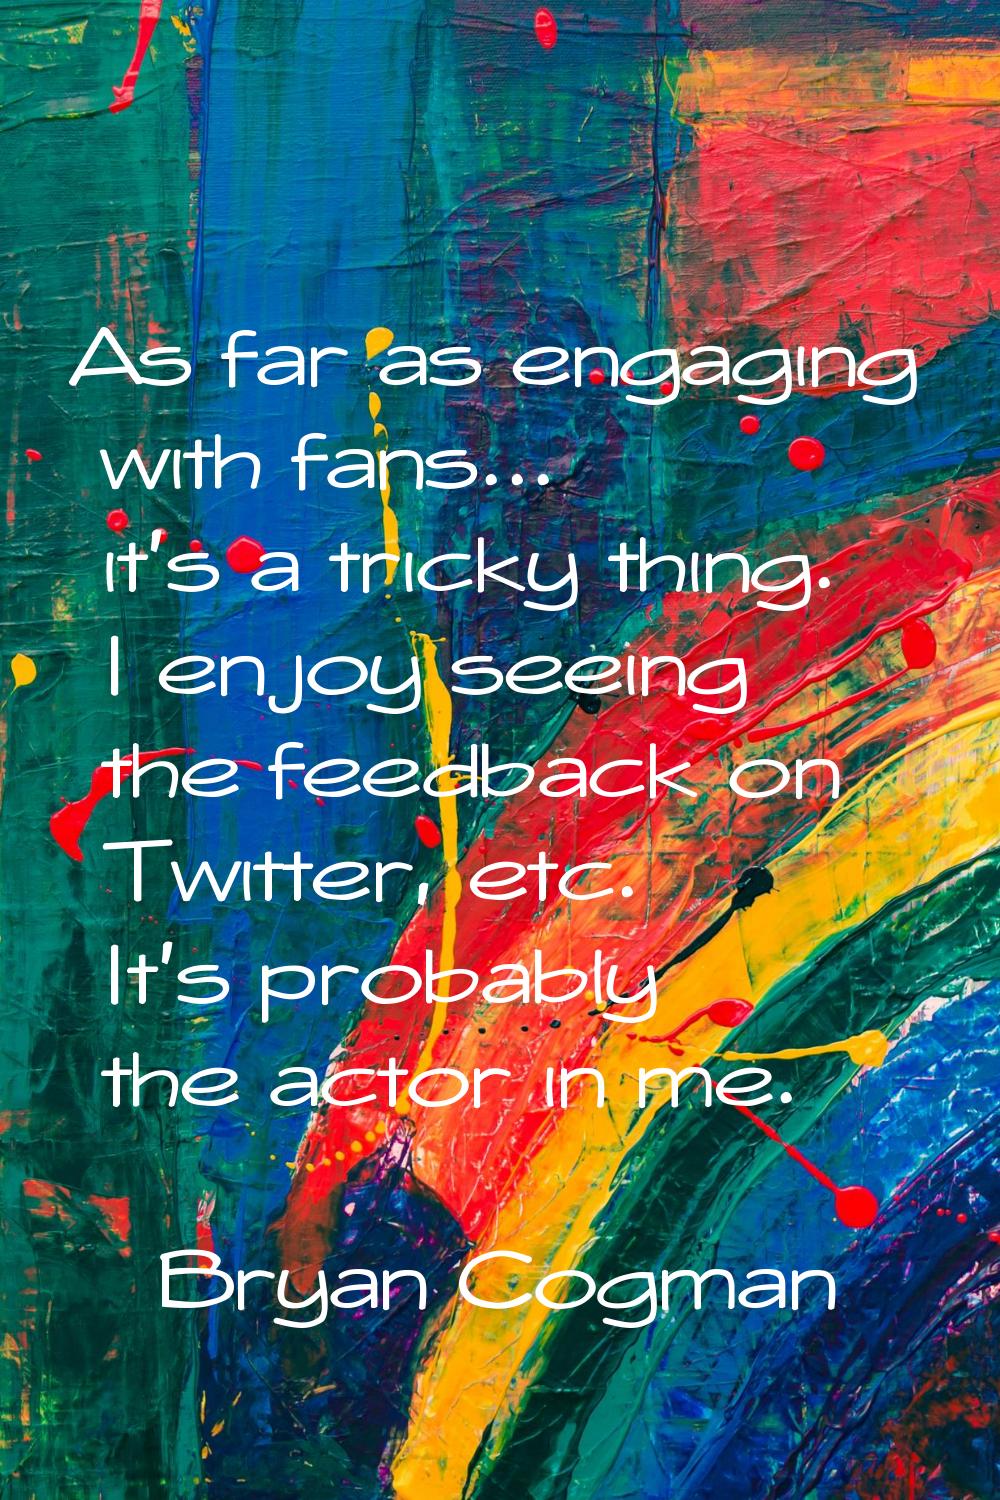 As far as engaging with fans... it's a tricky thing. I enjoy seeing the feedback on Twitter, etc. I